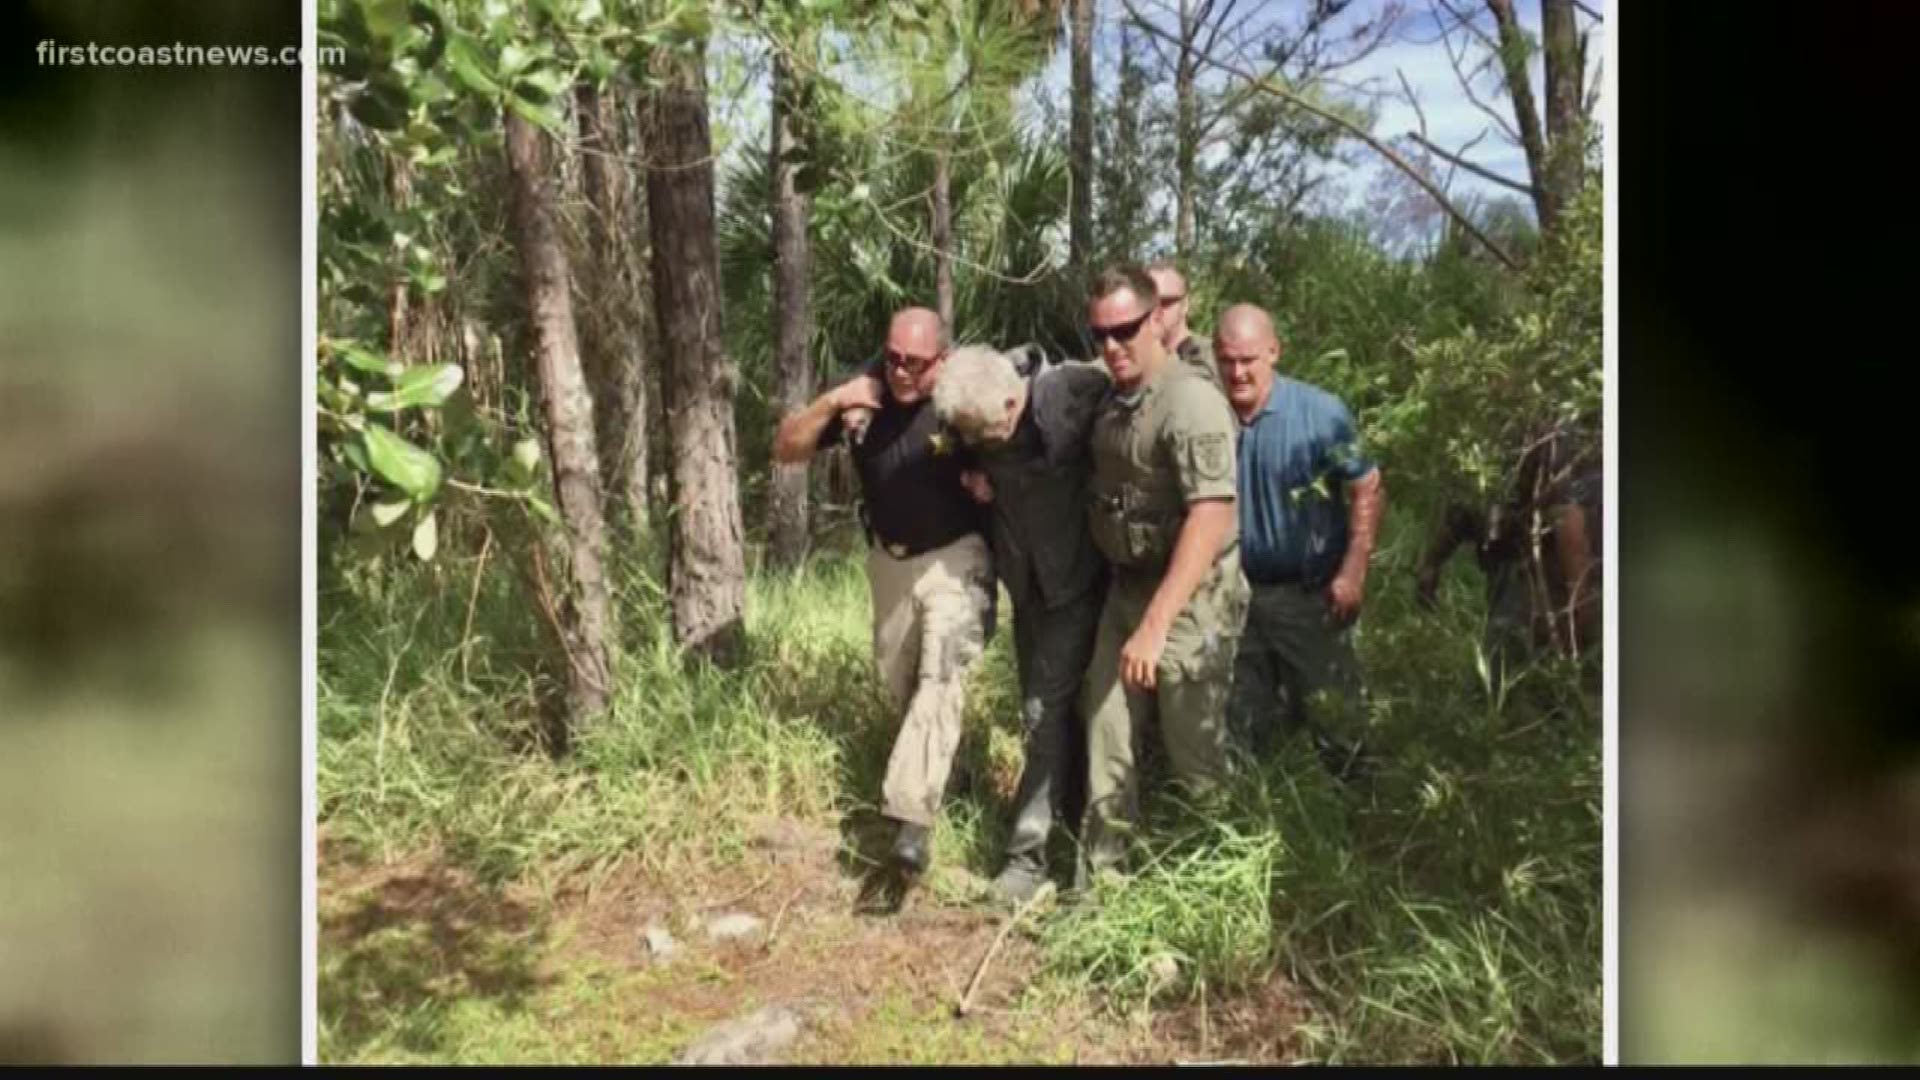 Authorities said he was covered from head to toe in mud.